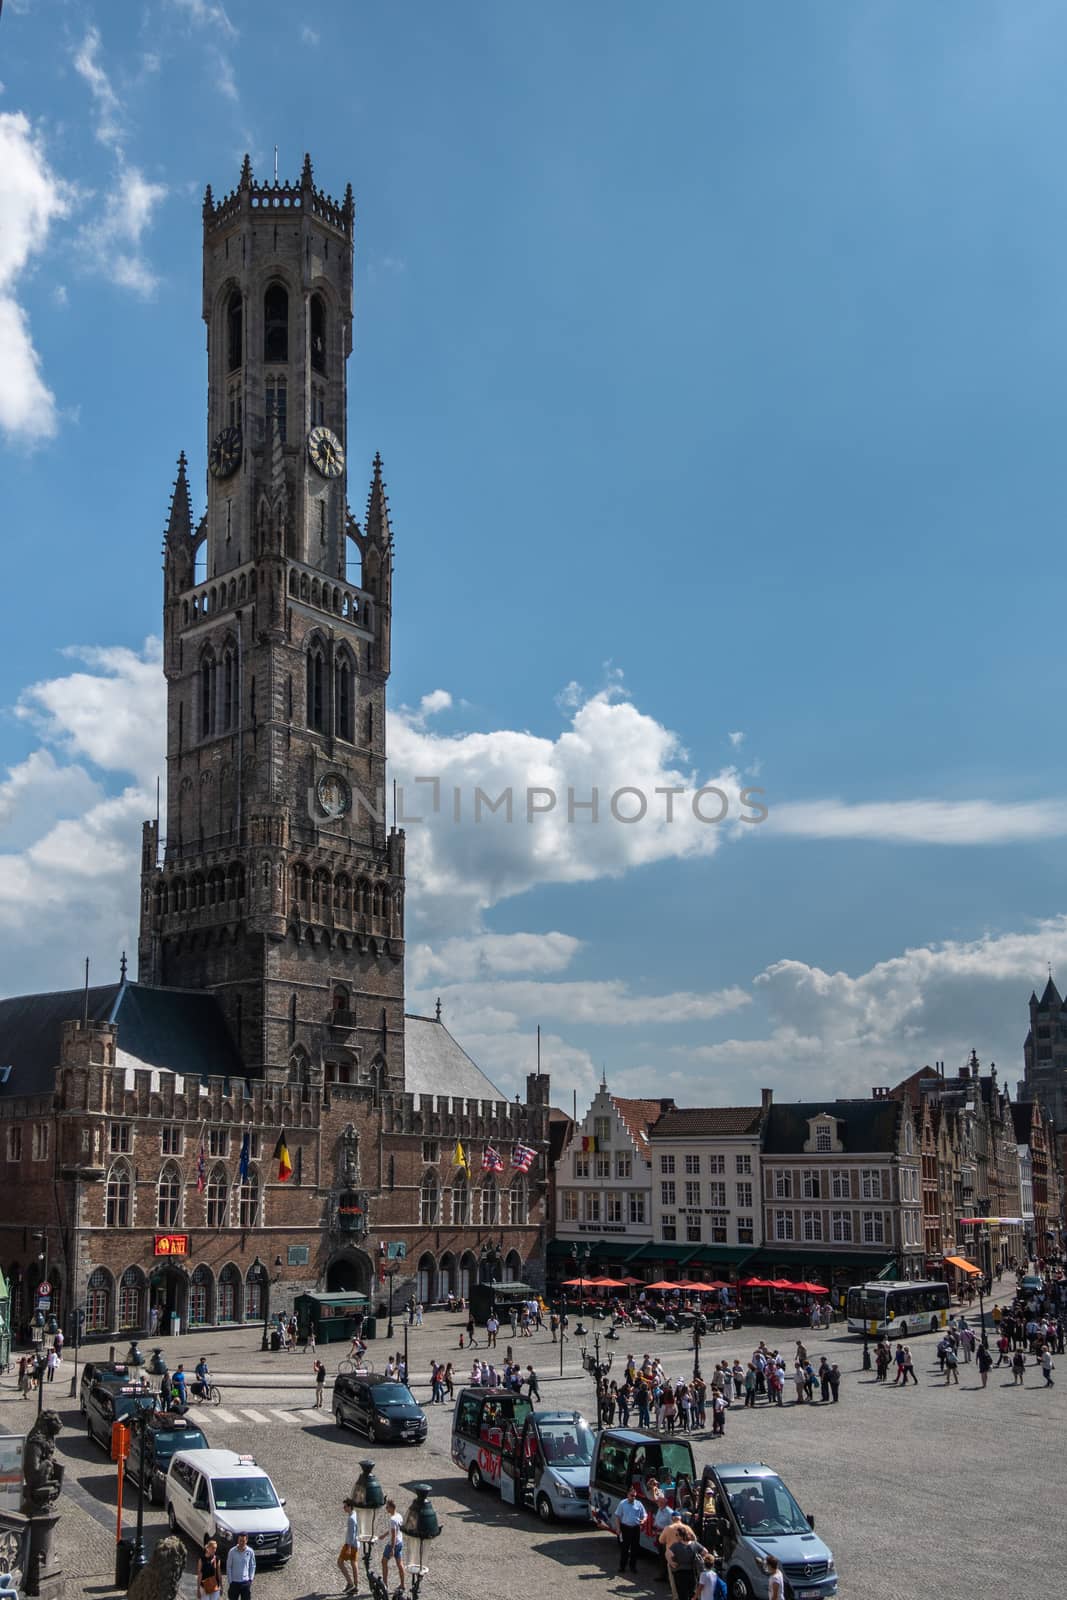 Bruges, Flanders, Belgium -  June 17, 2019: Belfry and tall clock tower, Halletoren, behind Markt square with people, taxis and tourist buses. All under blue sky with white clouds.